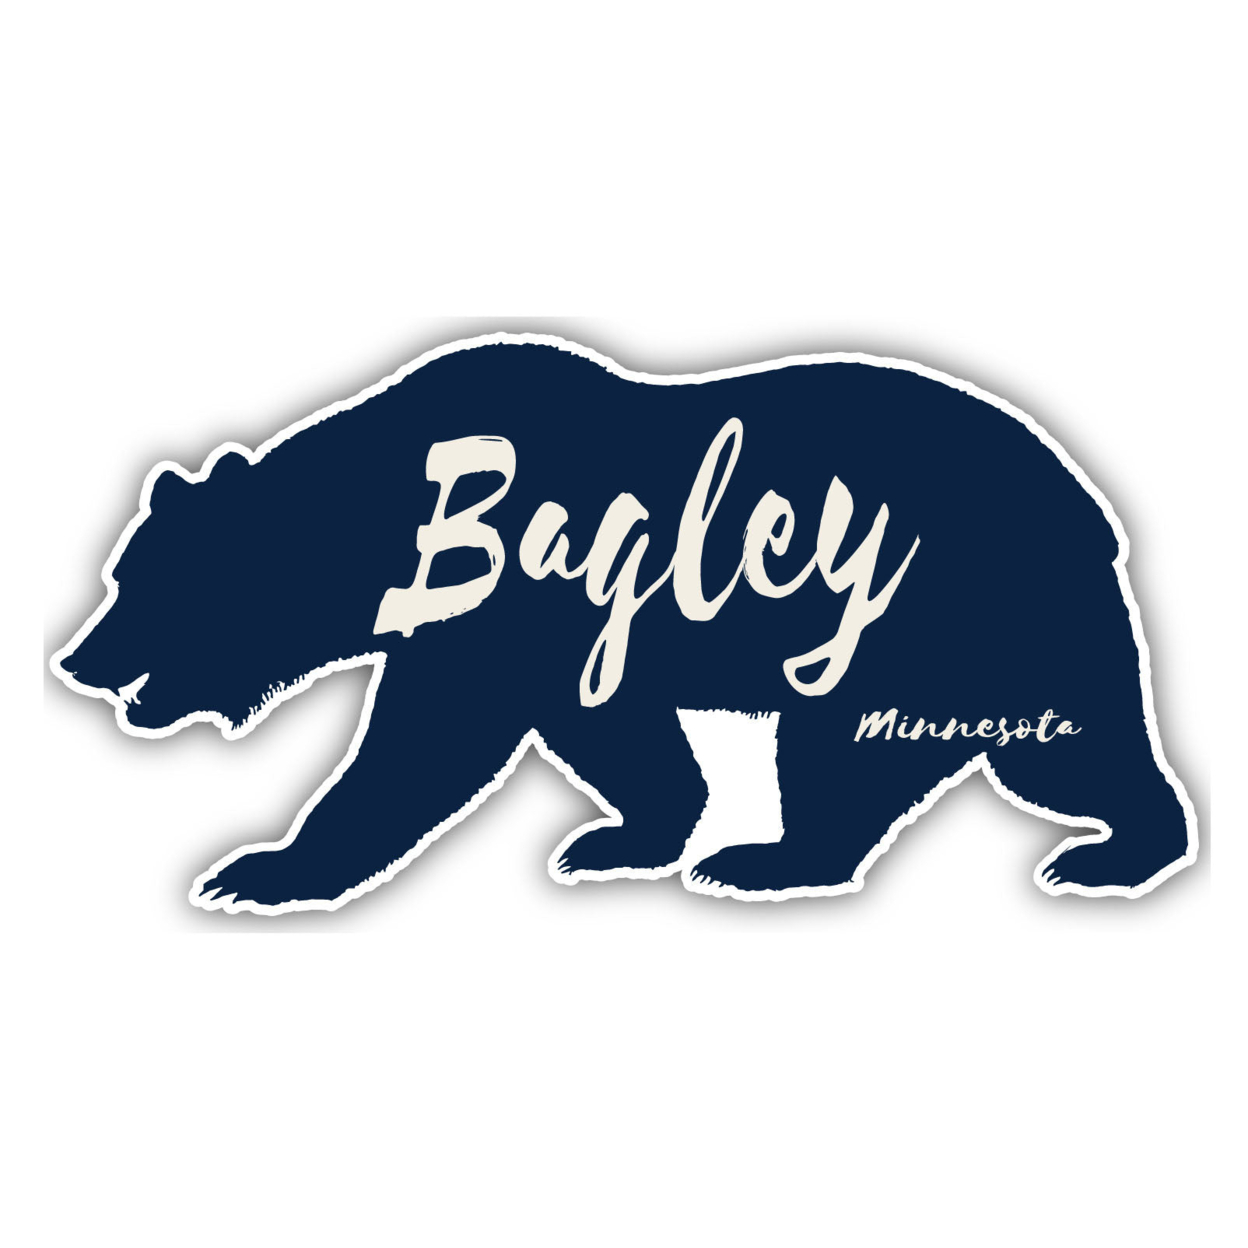 Bagley Minnesota Souvenir Decorative Stickers (Choose Theme And Size) - 4-Pack, 4-Inch, Bear